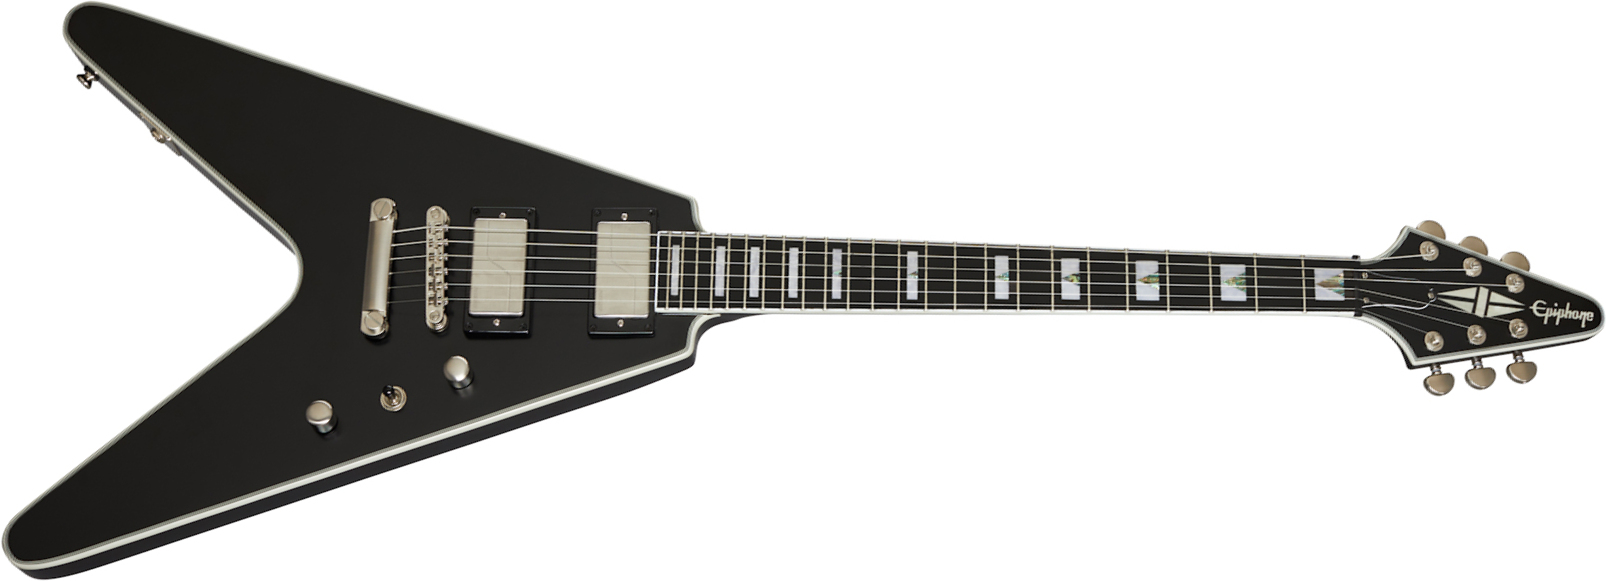 Epiphone Flying V Prophecy Modern 2h Fishman Fluence Ht Eb - Black Aged - Retro rock electric guitar - Main picture